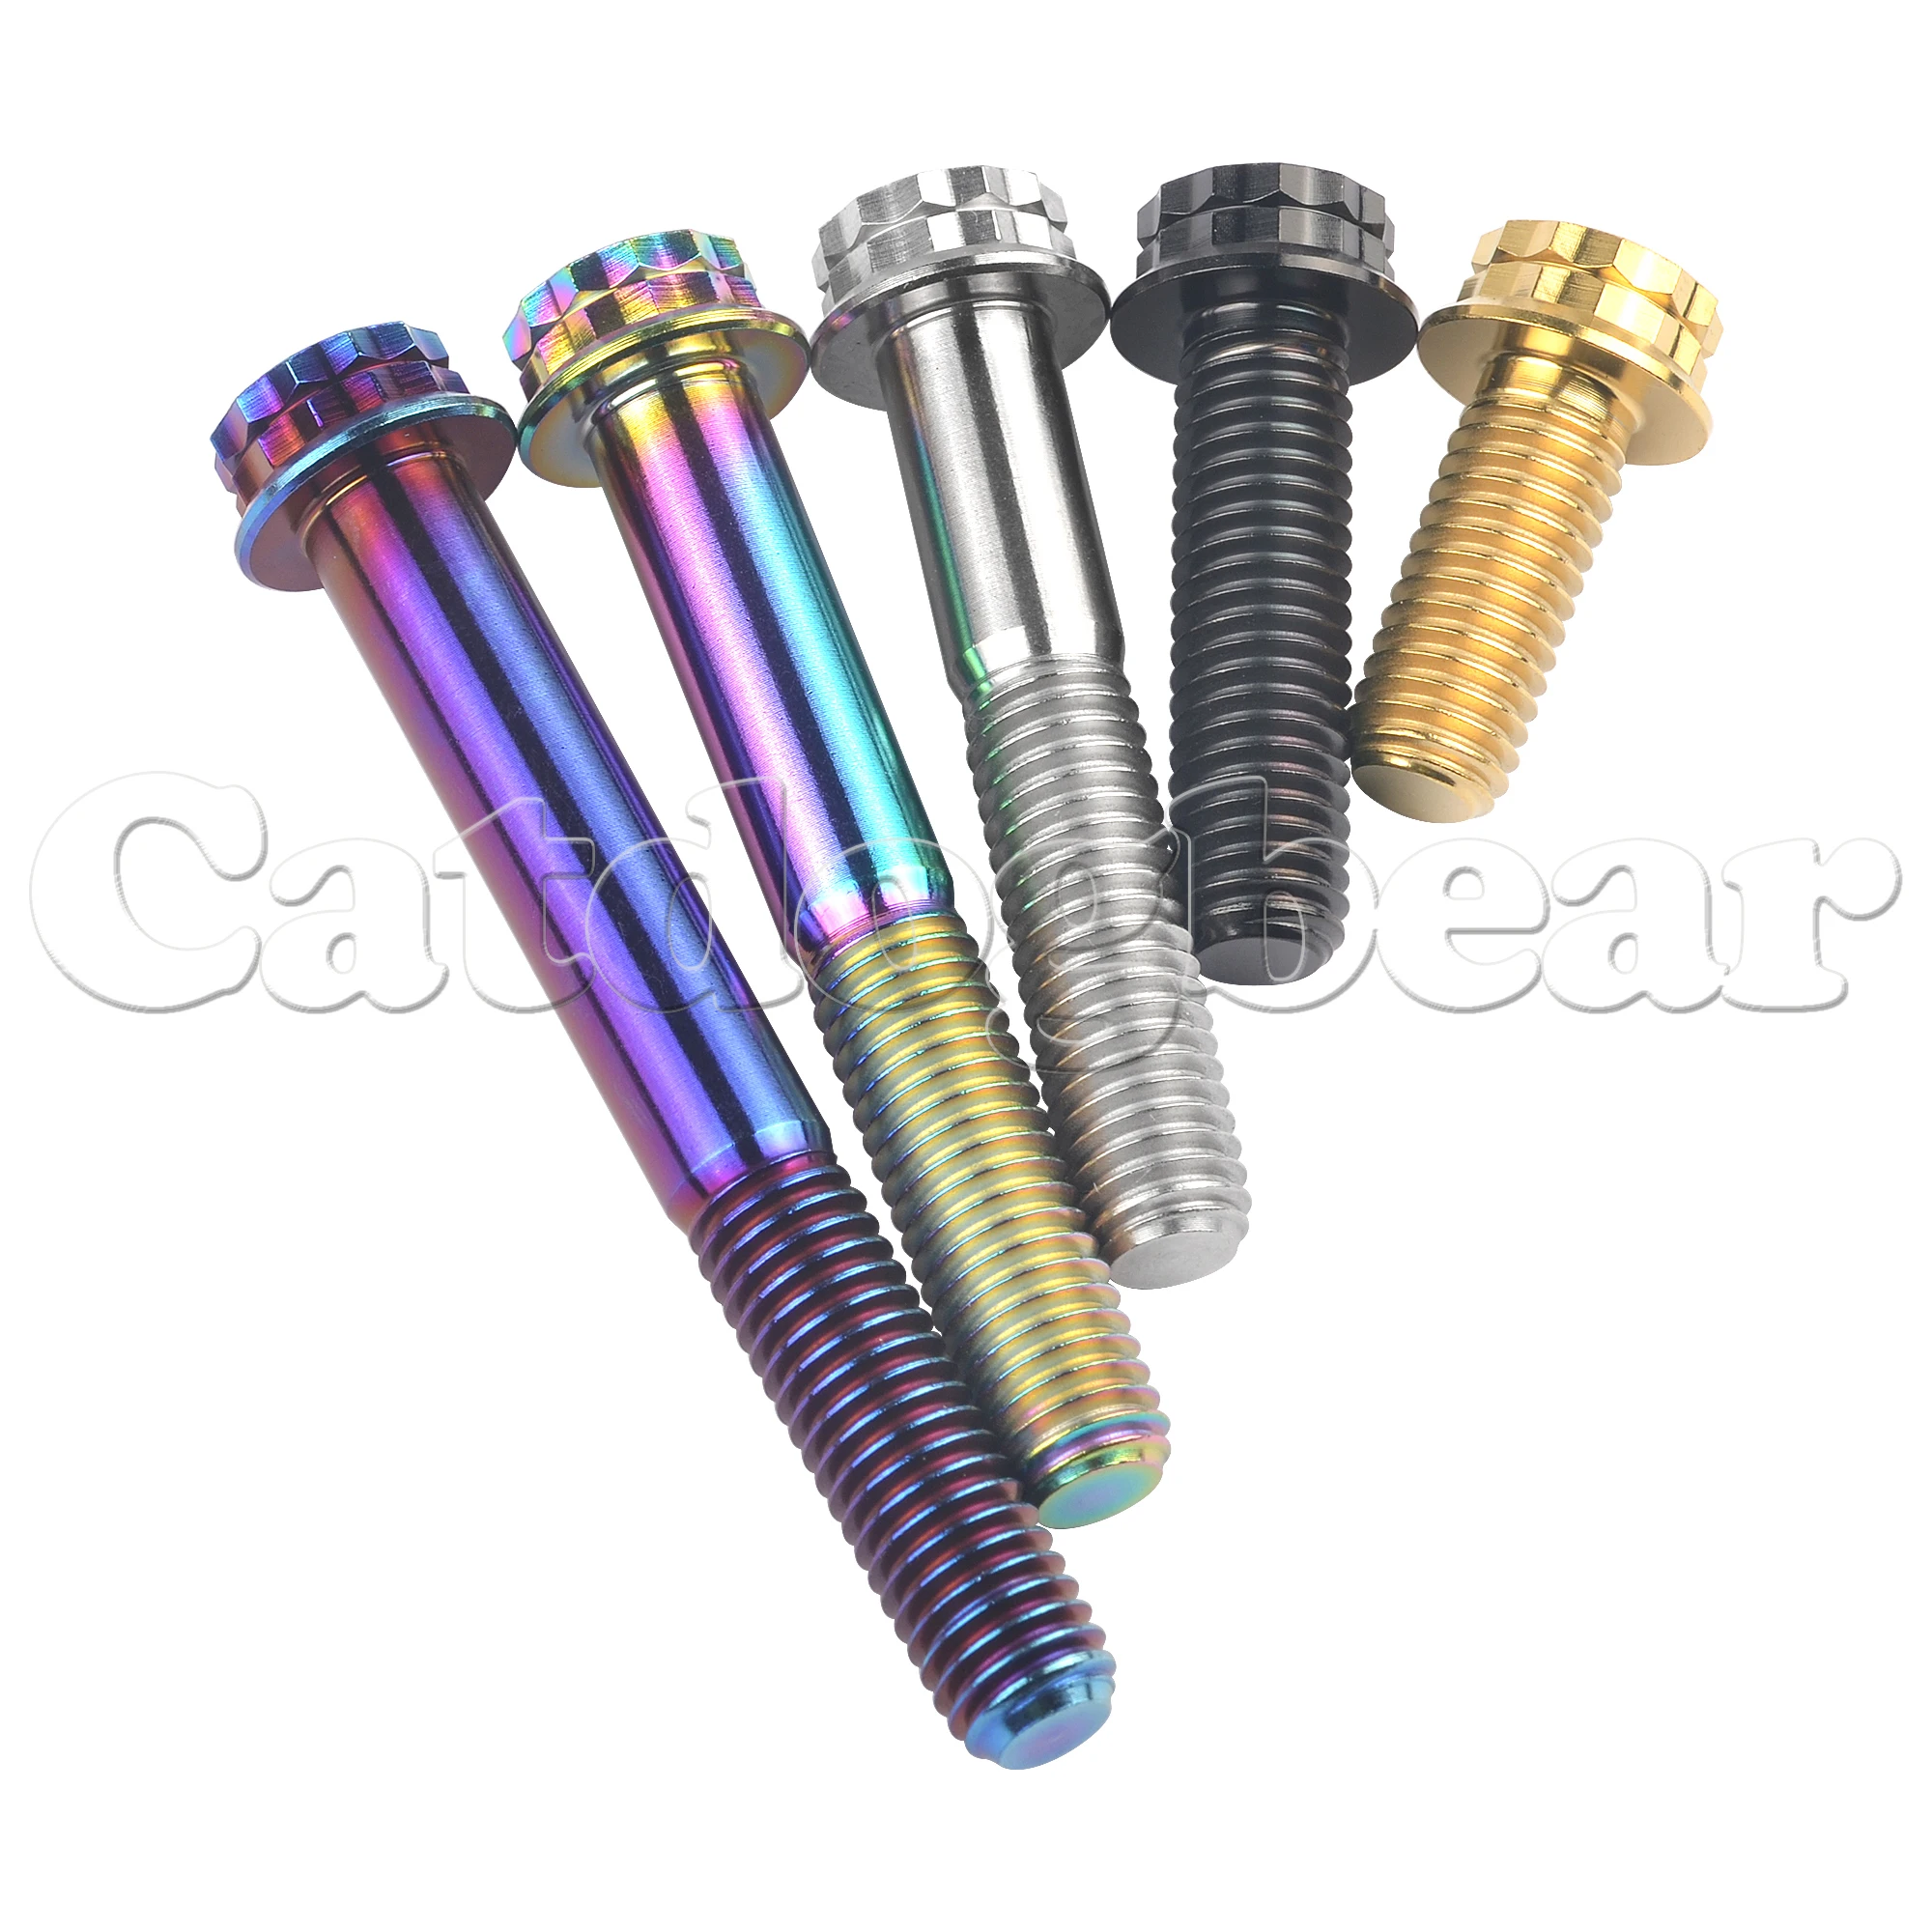 

Catdogbear Titanium Flange 12 Points Bolt M8x15 20 25 30 35 40 45 50 55 60 65 80mm T40 Torx Pitch1.25mm for Cars Motorcycles